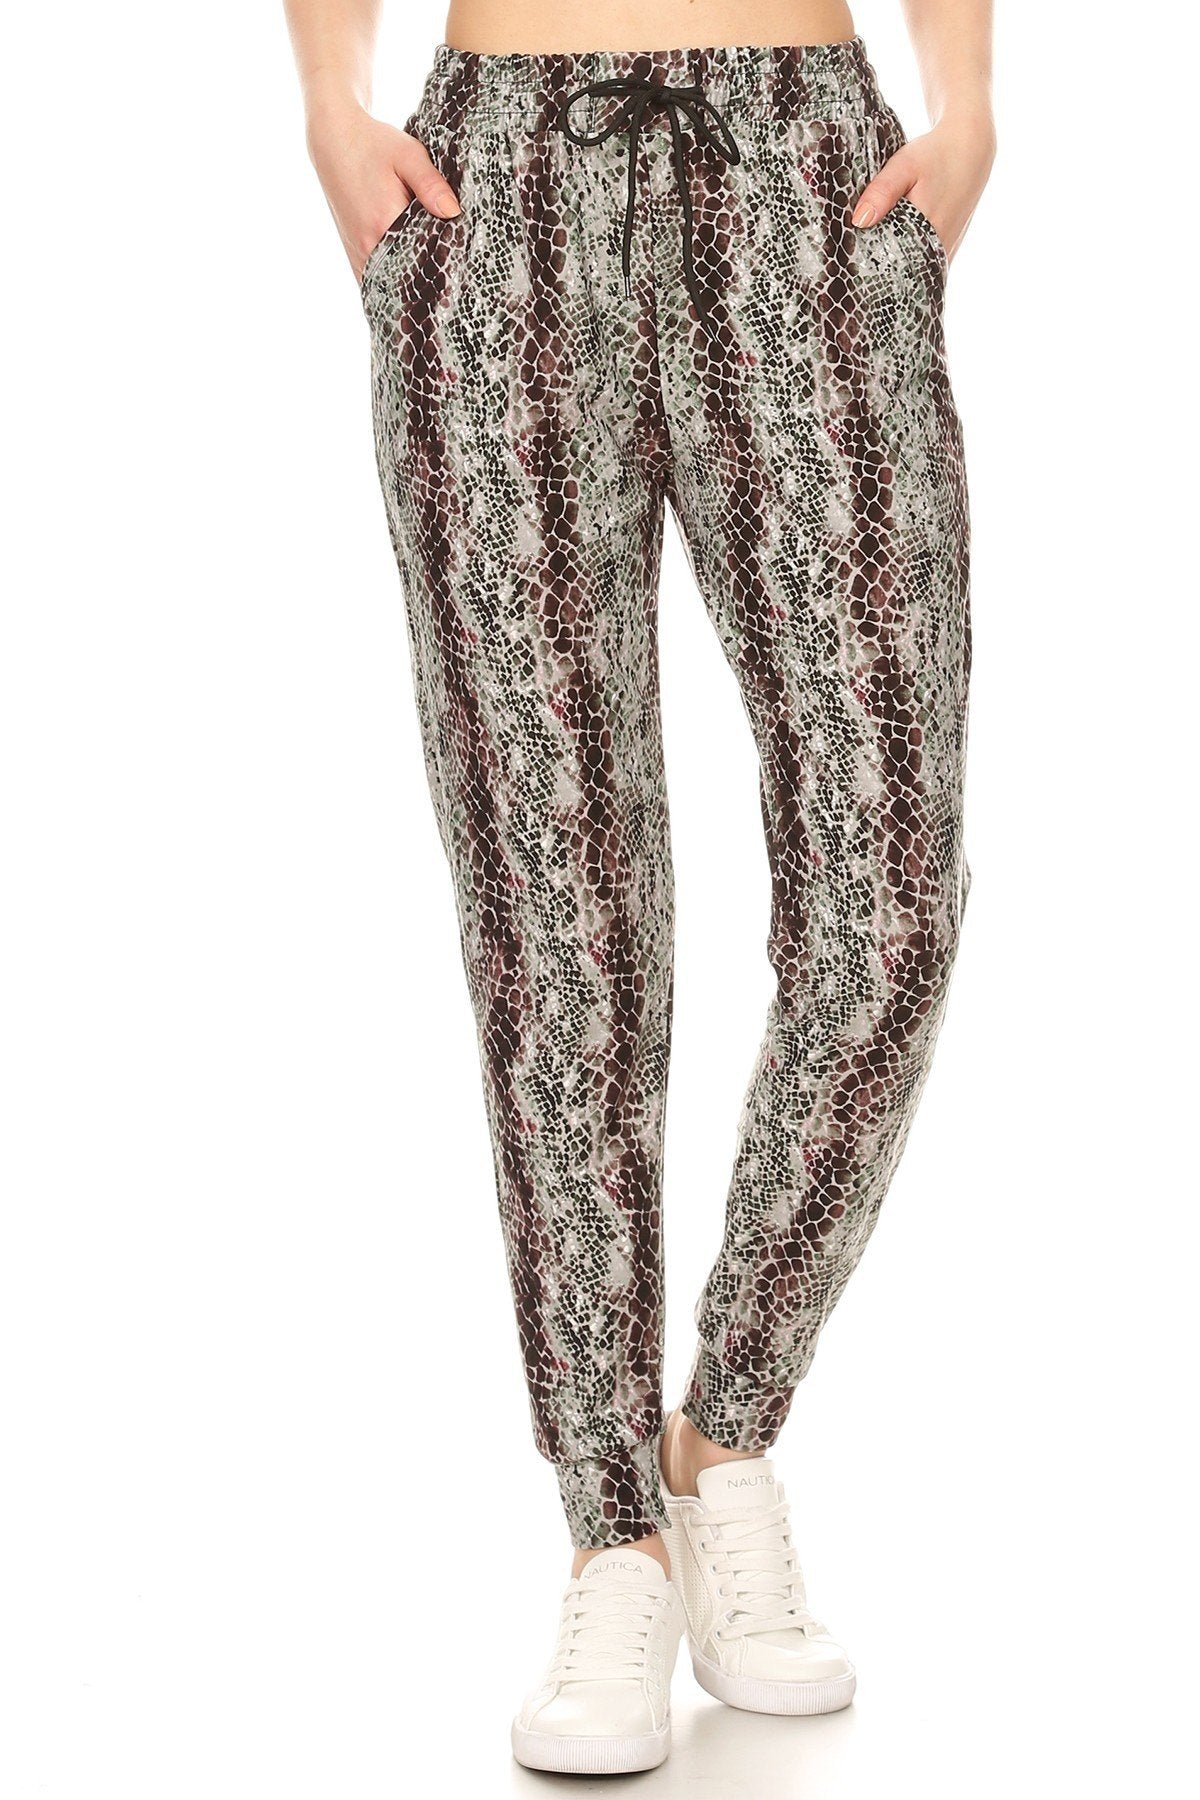 Snakeskin Printed Joggers With Solid Trim, Drawstring Waistband, Waist